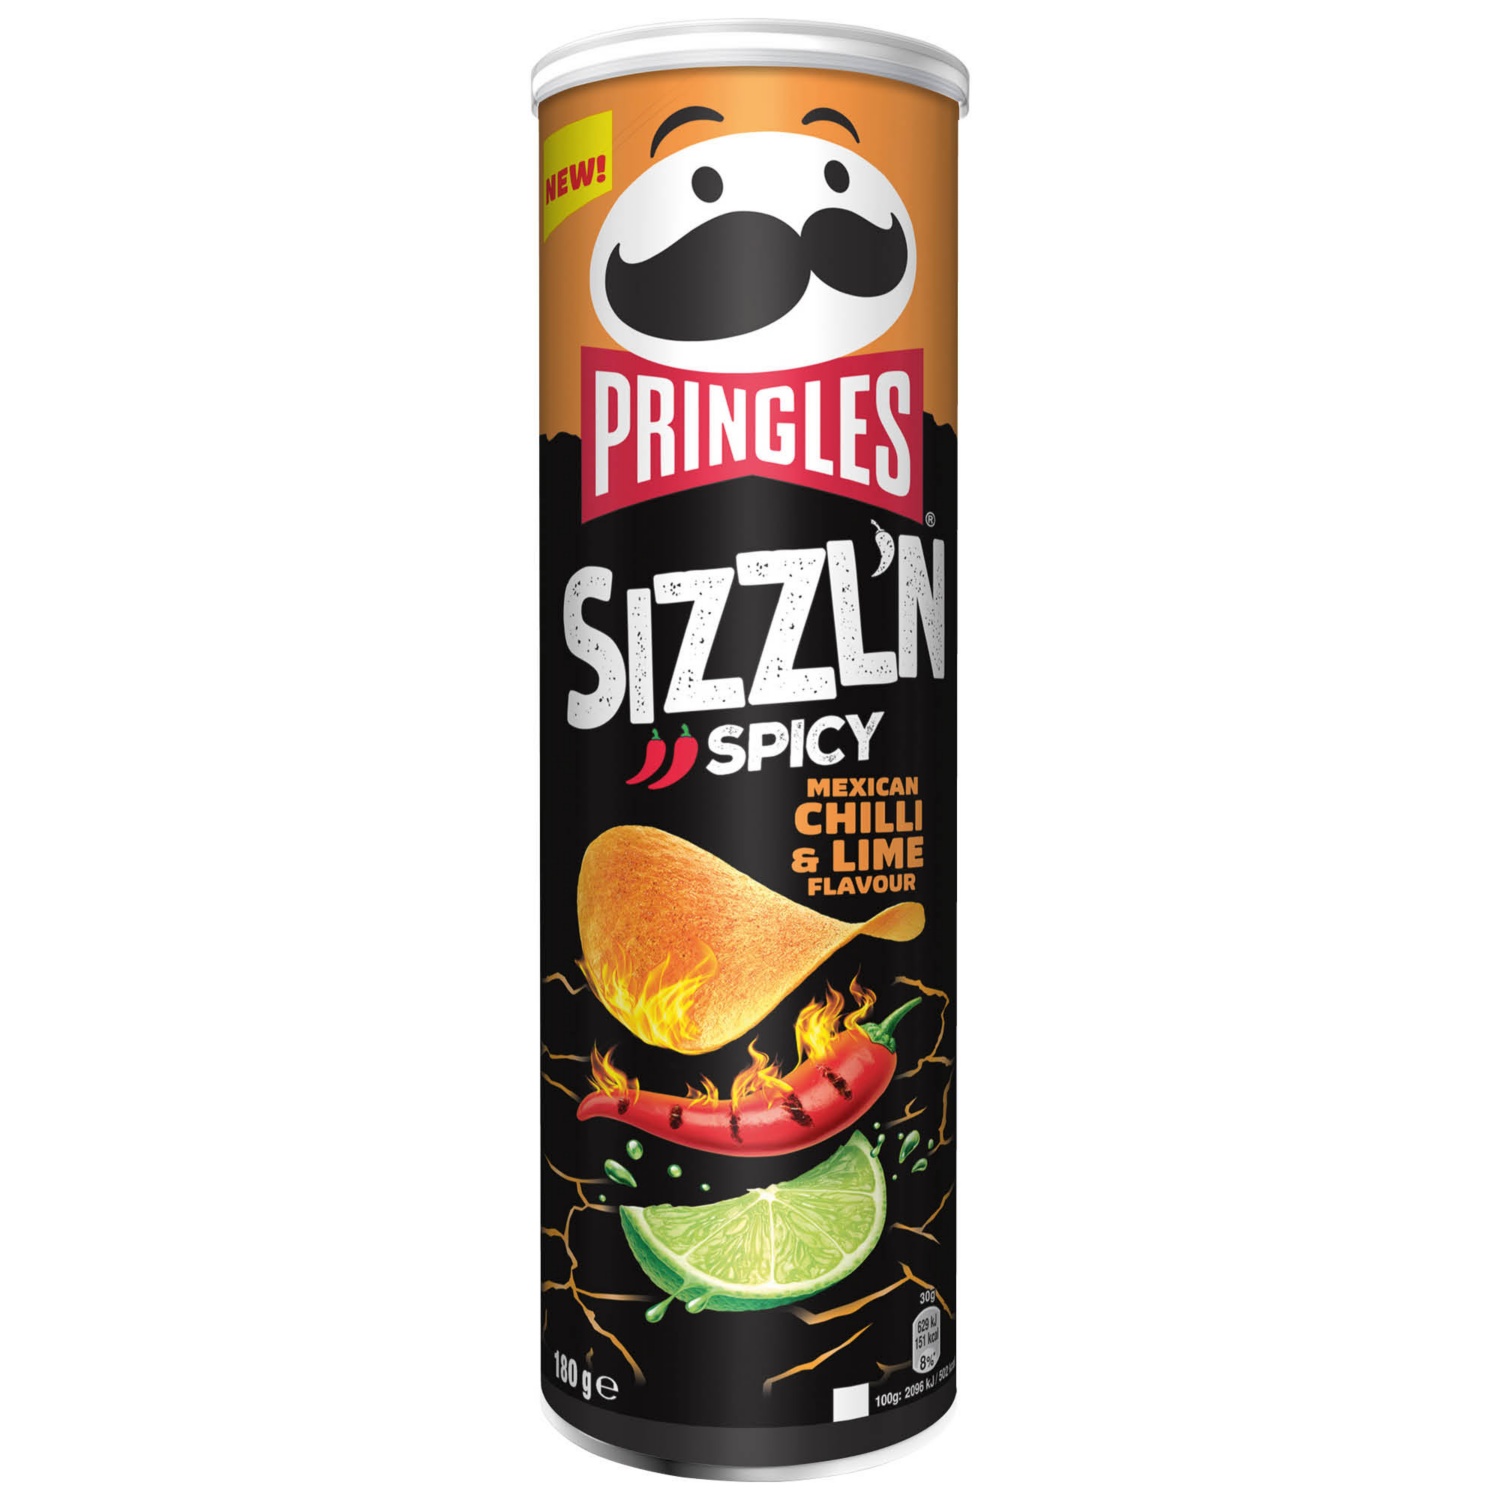 Pringles Sizzl'n, Mexican Chili & Lime